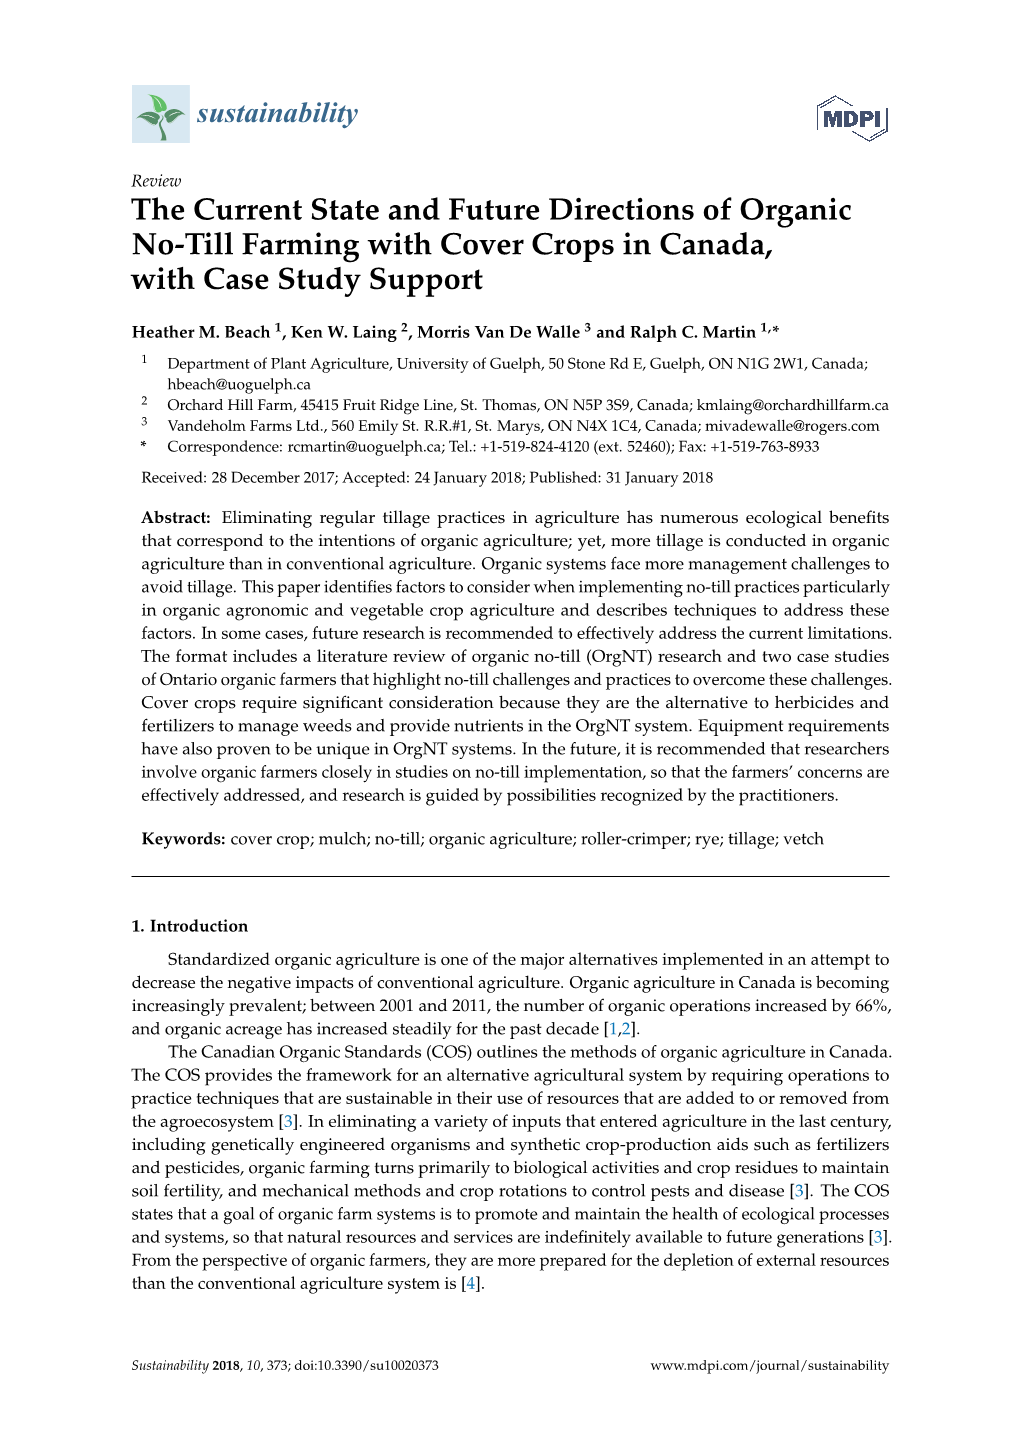 The Current State and Future Directions of Organic No-Till Farming with Cover Crops in Canada, with Case Study Support